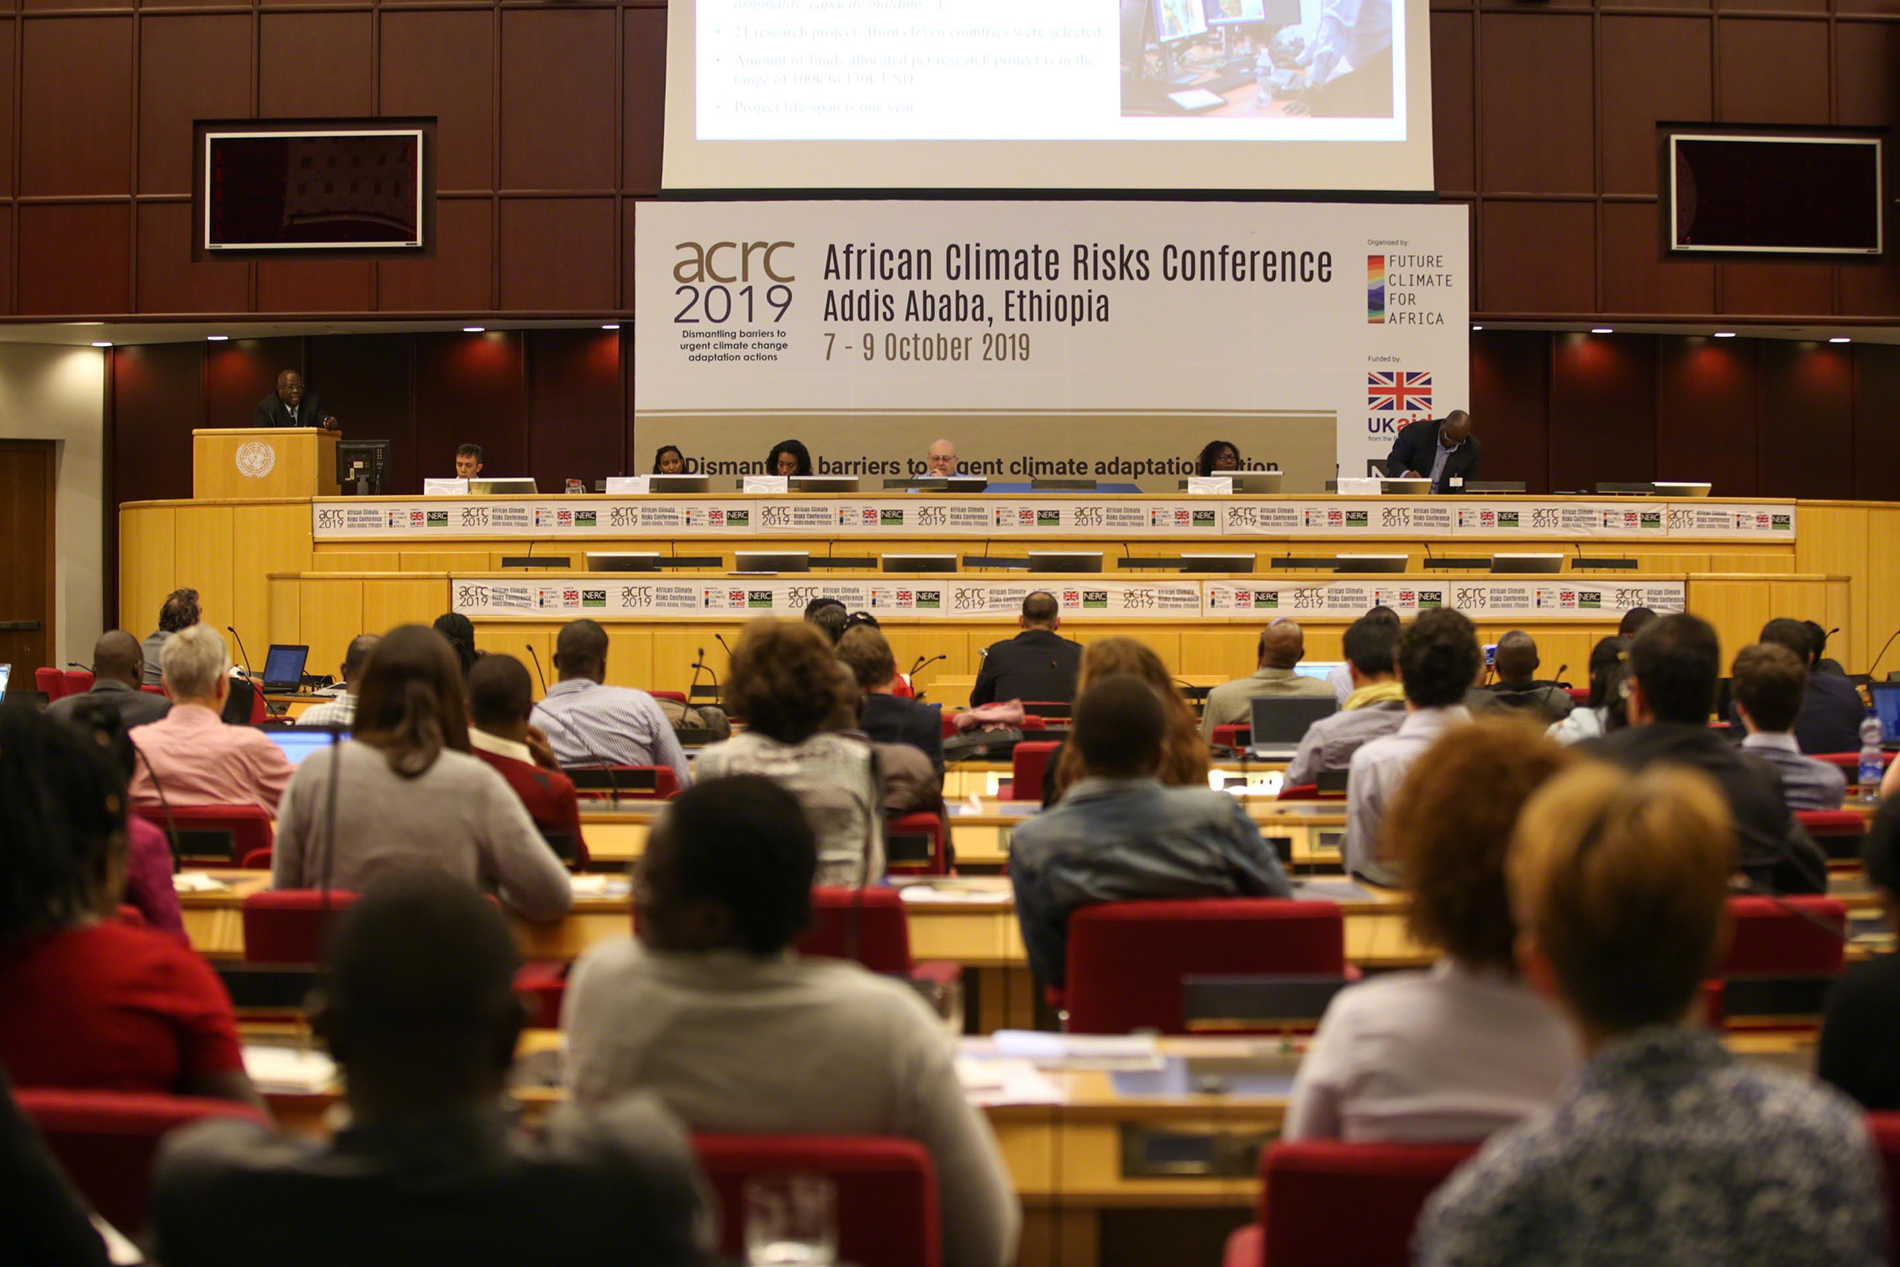 African Climate Risks Conferences in Ethiopia, October 2019. Photo by IISD/ENB | Kiara Worth